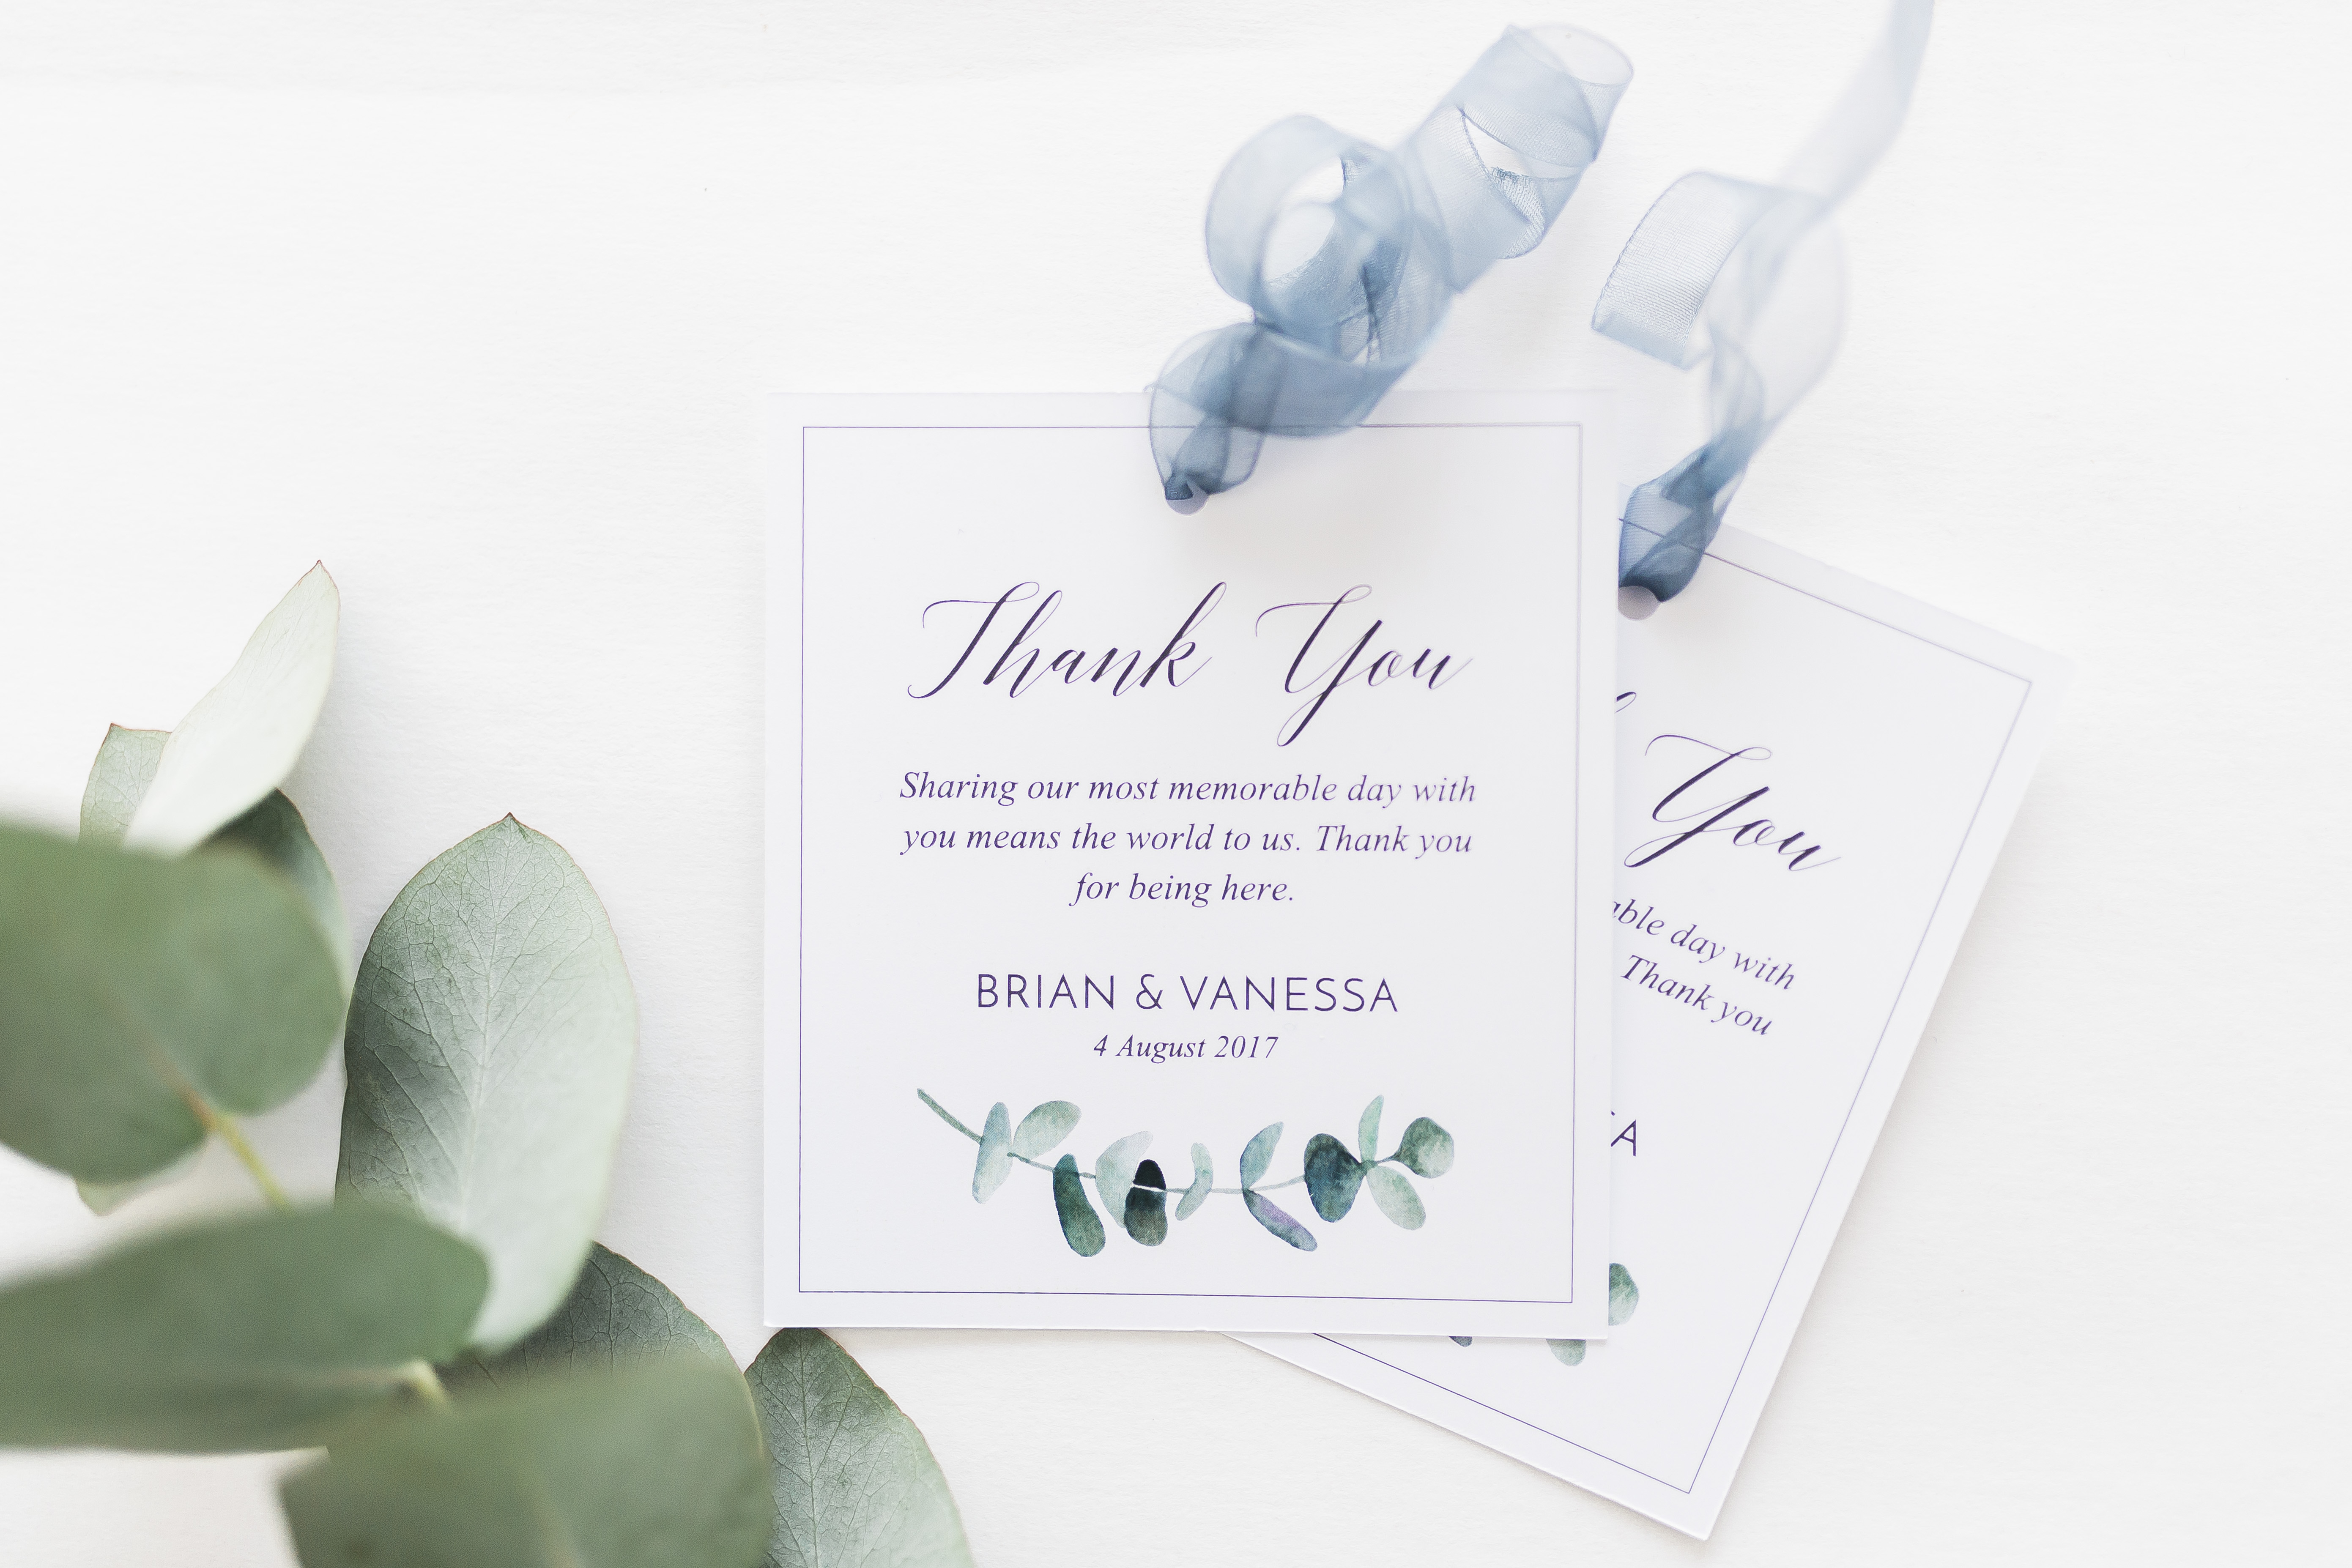 Download These Free Printable Wedding Thank You Tags | Lovilee Blog - Free Printable Wedding Thank You Tags